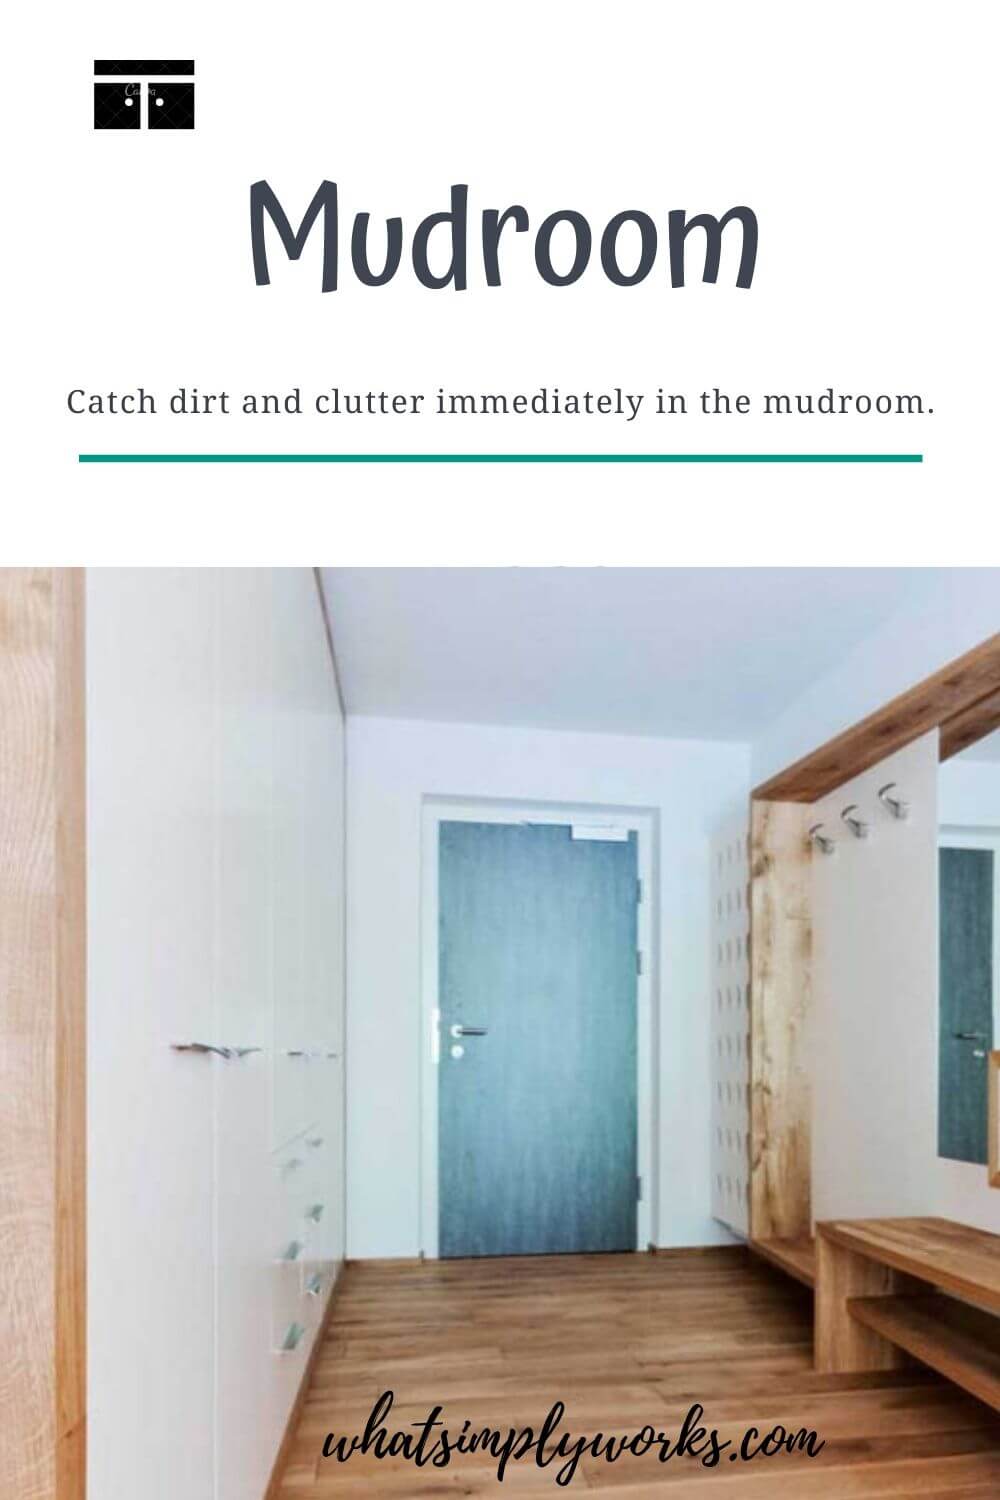 Mudroom Benefits for Modern Homemakers